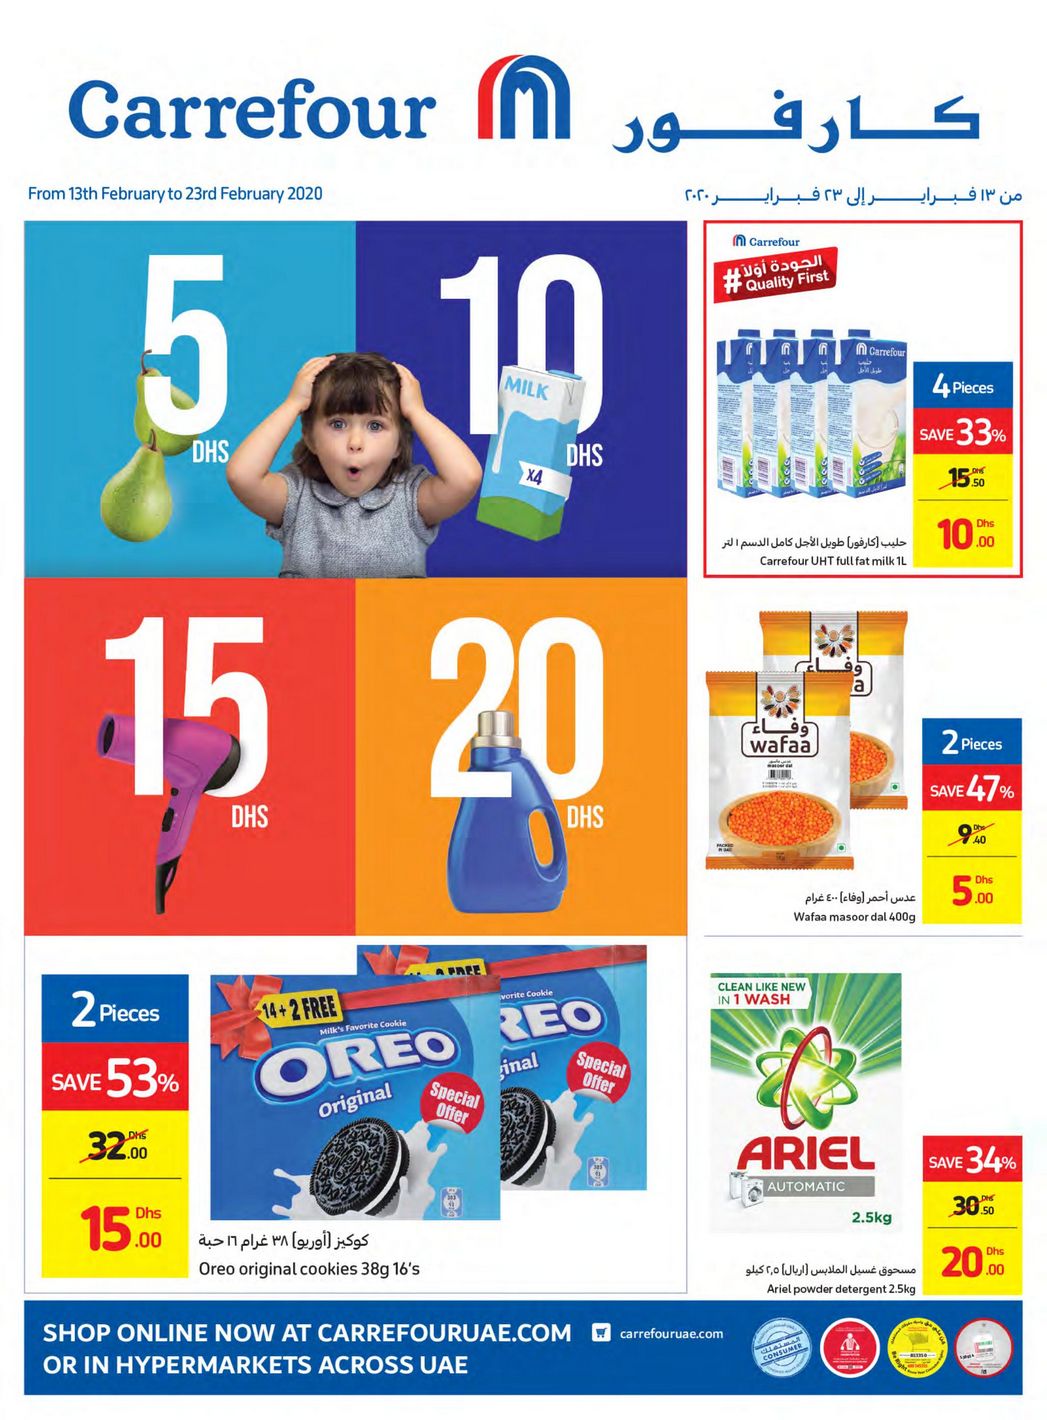 Carrefour Offers from 13/2 till 23/2 | Carrefour UAE 2